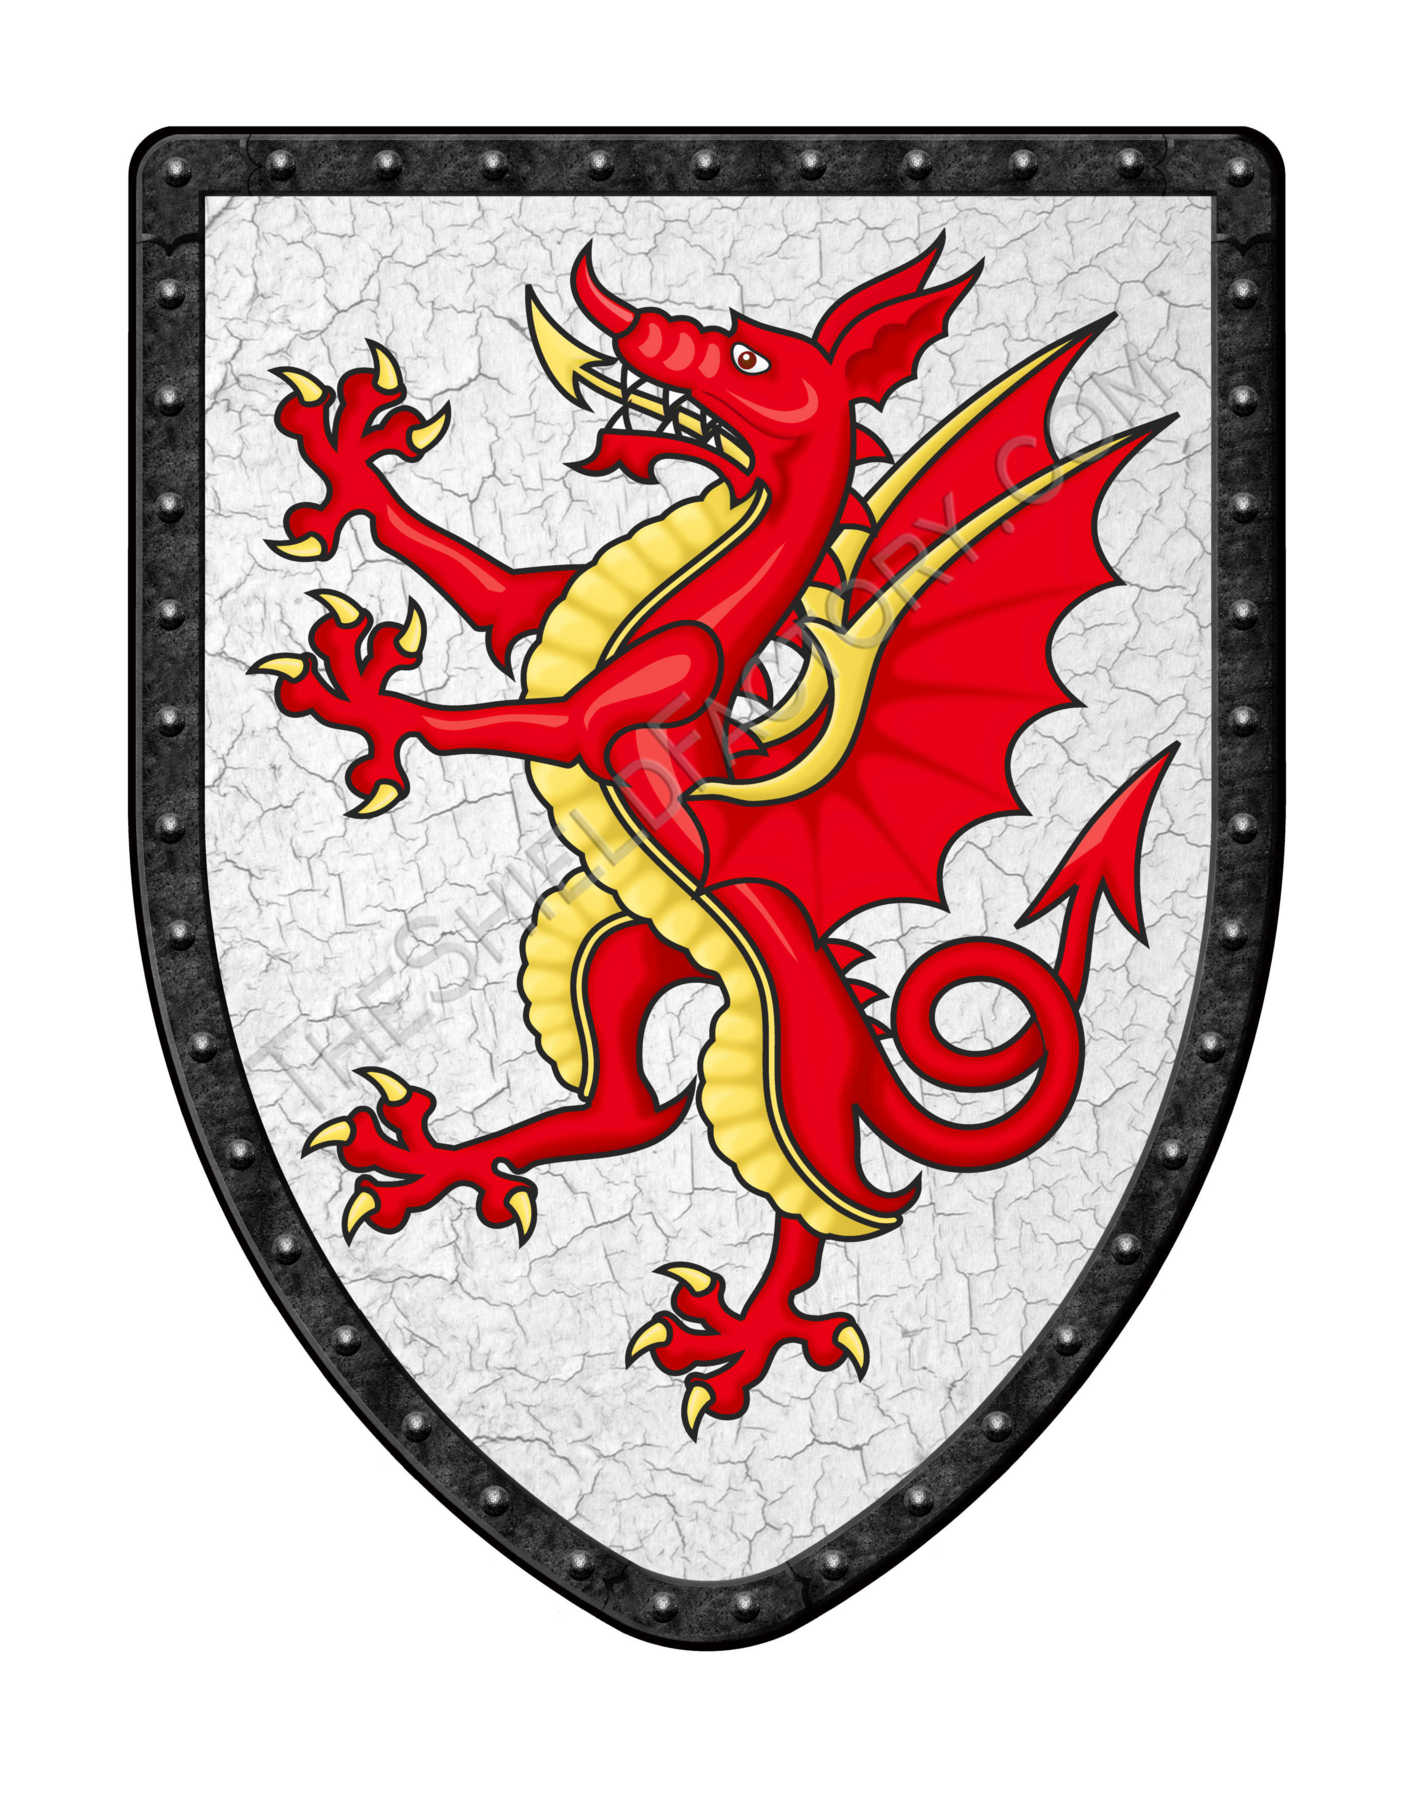 The Shield Factory Coat of Arms and Custom Shields